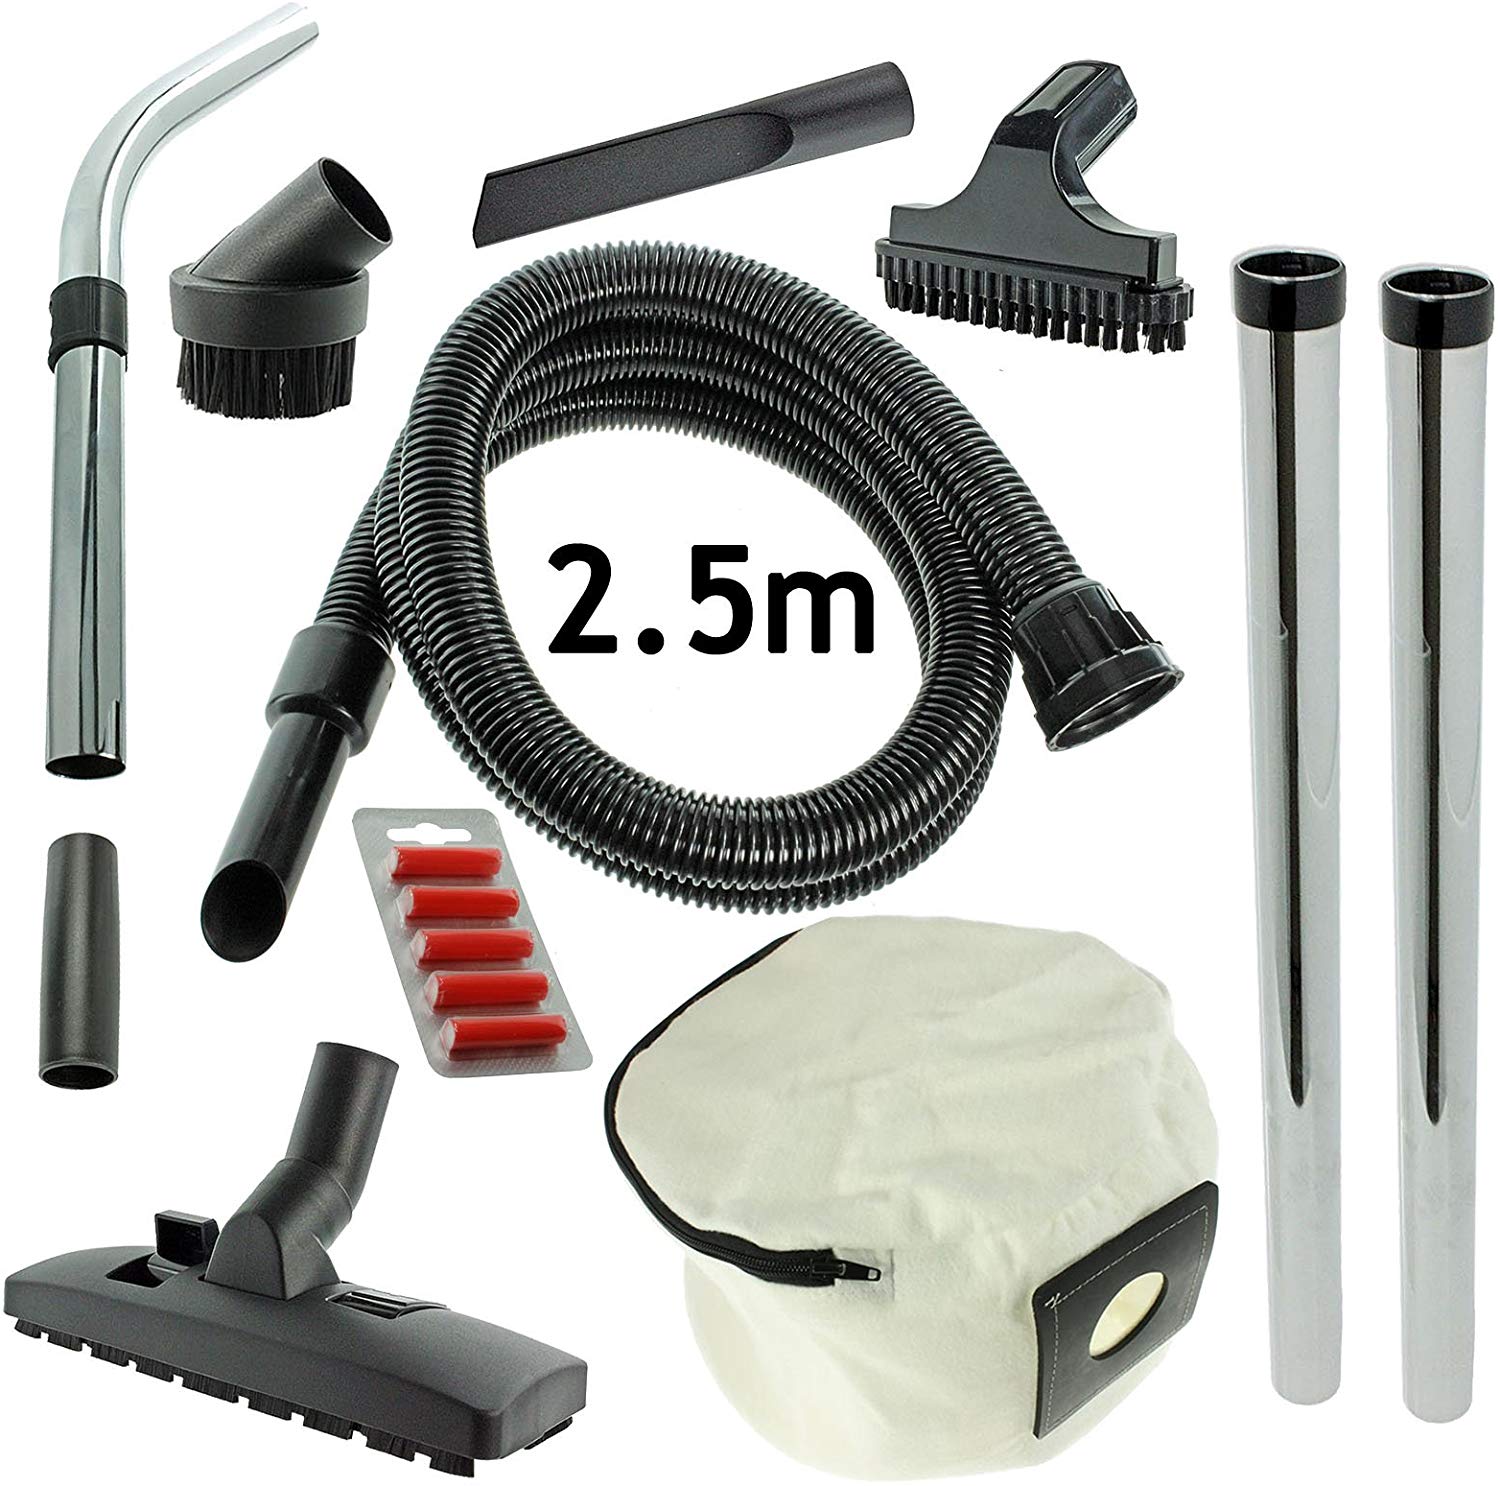 SPARES2GO 2.5m Hose & Tool Kit + Zip Up Bag For Numatic Henry Hetty James Vacuum Cleaner + Fresheners